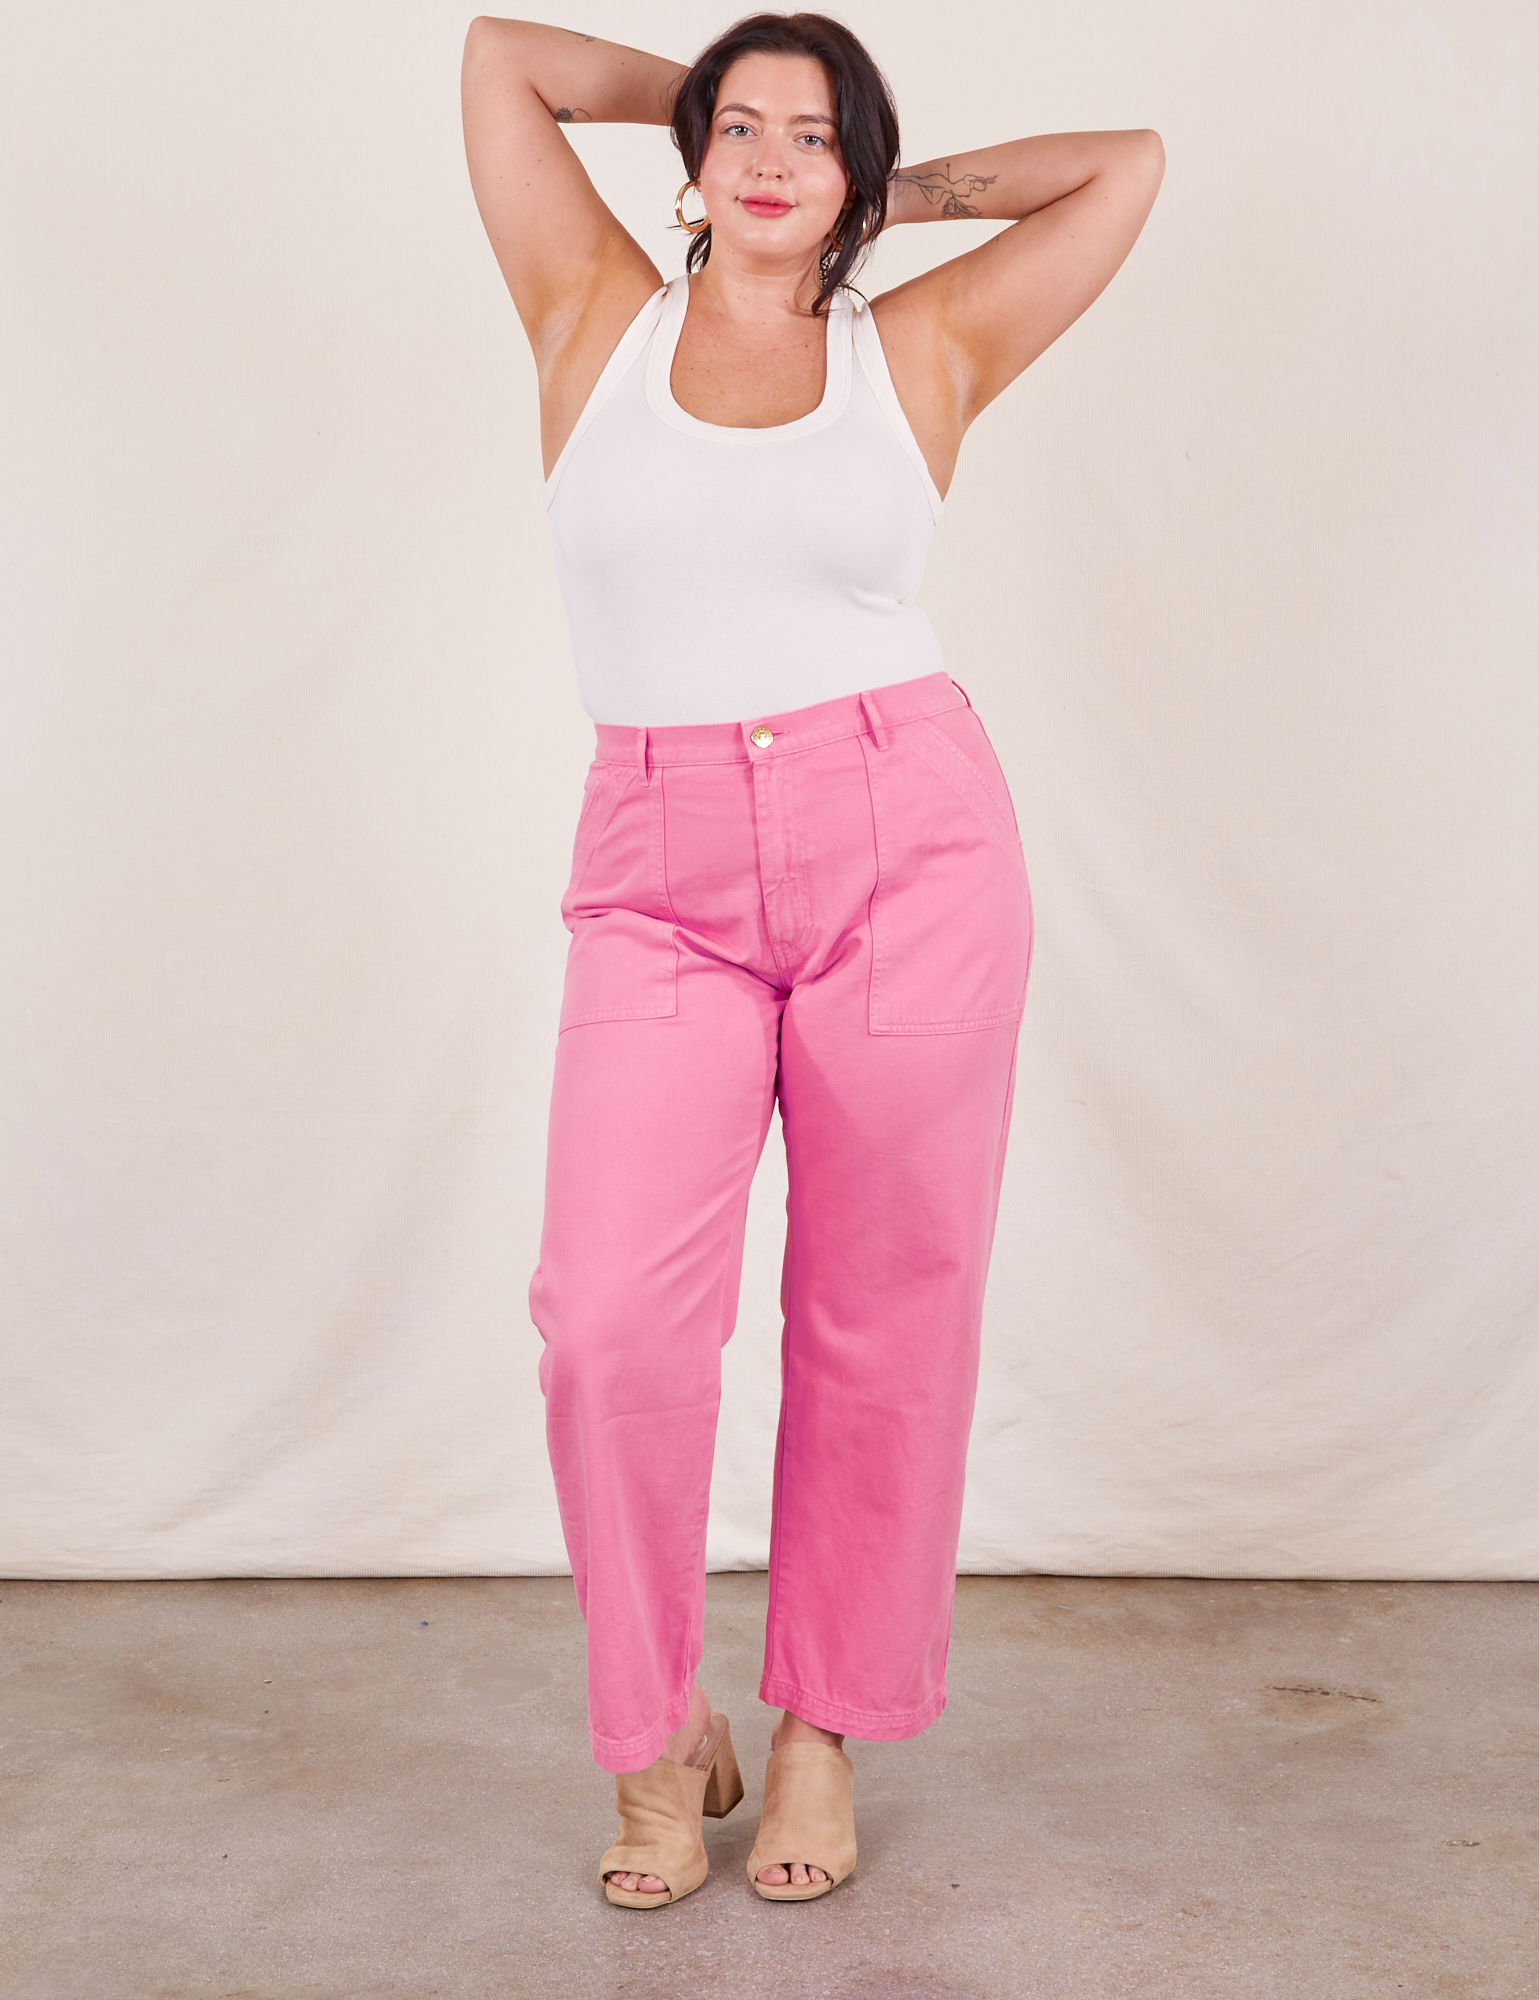 Faye is wearing Work Pants in Bubblegum Pink and a Tank Top in vintage tee off-white